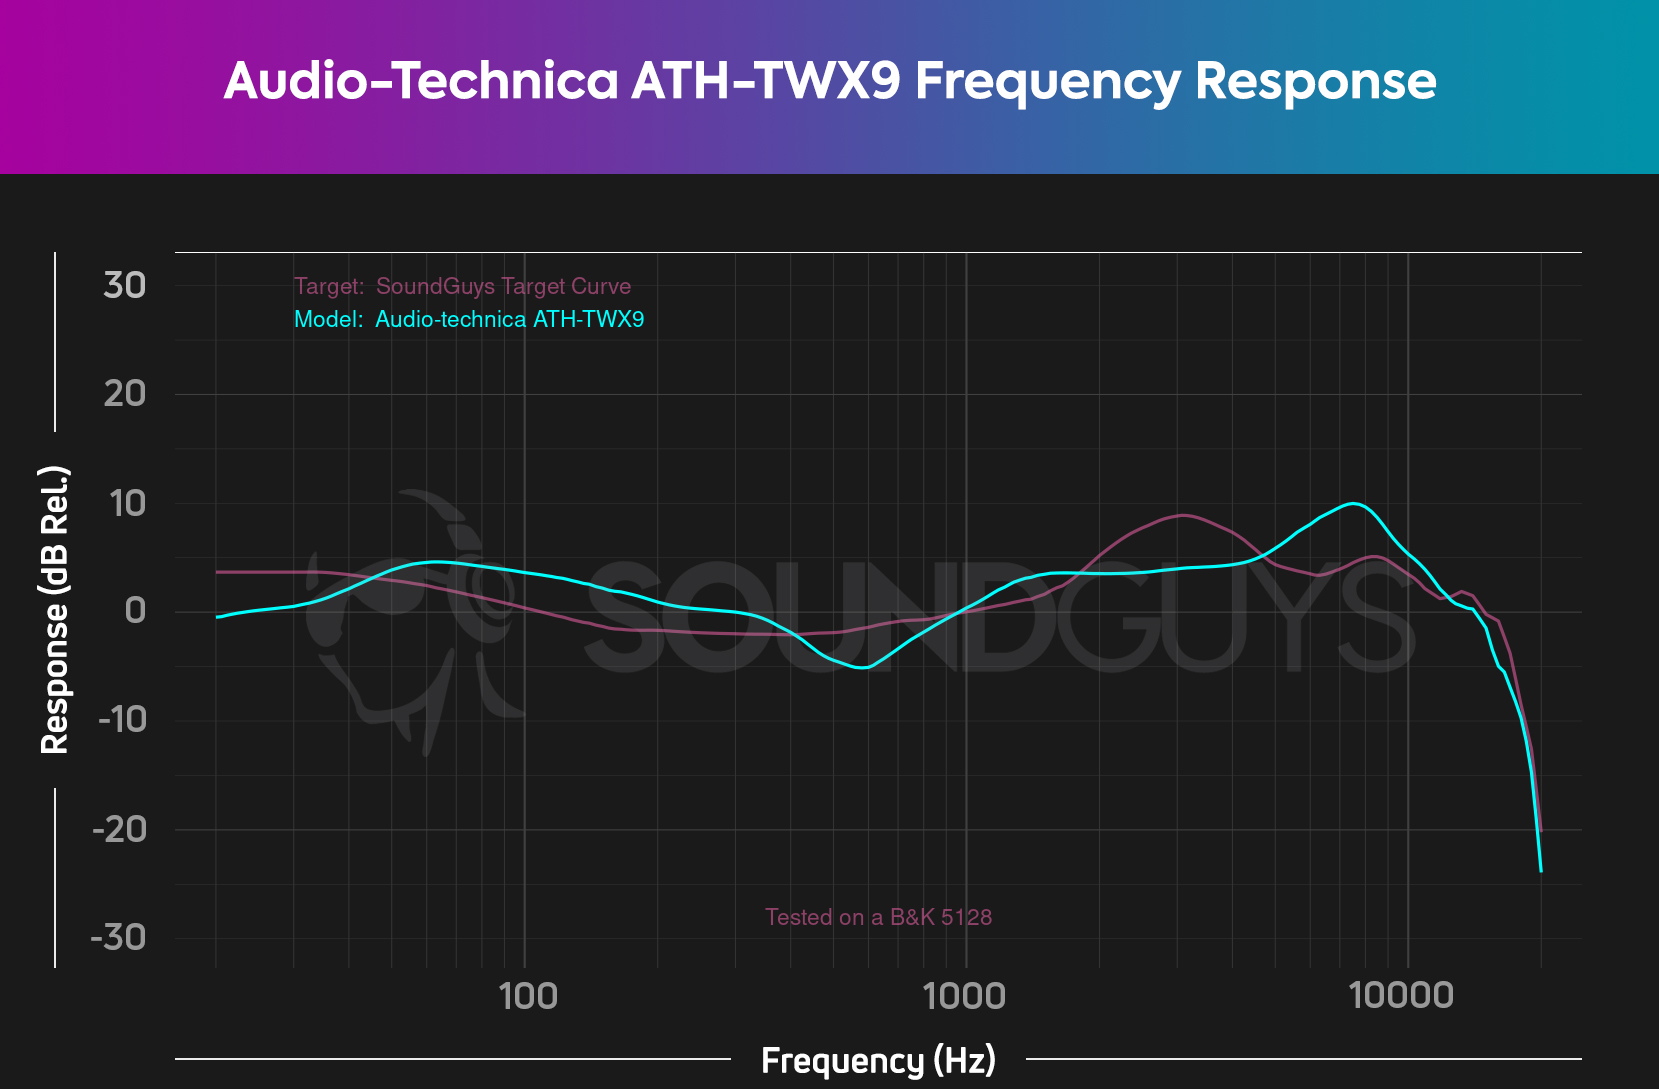 A frequency response chart for the Audio-Technica ATH-TWX9, which shows sound very close to the SoundGuys target curve.